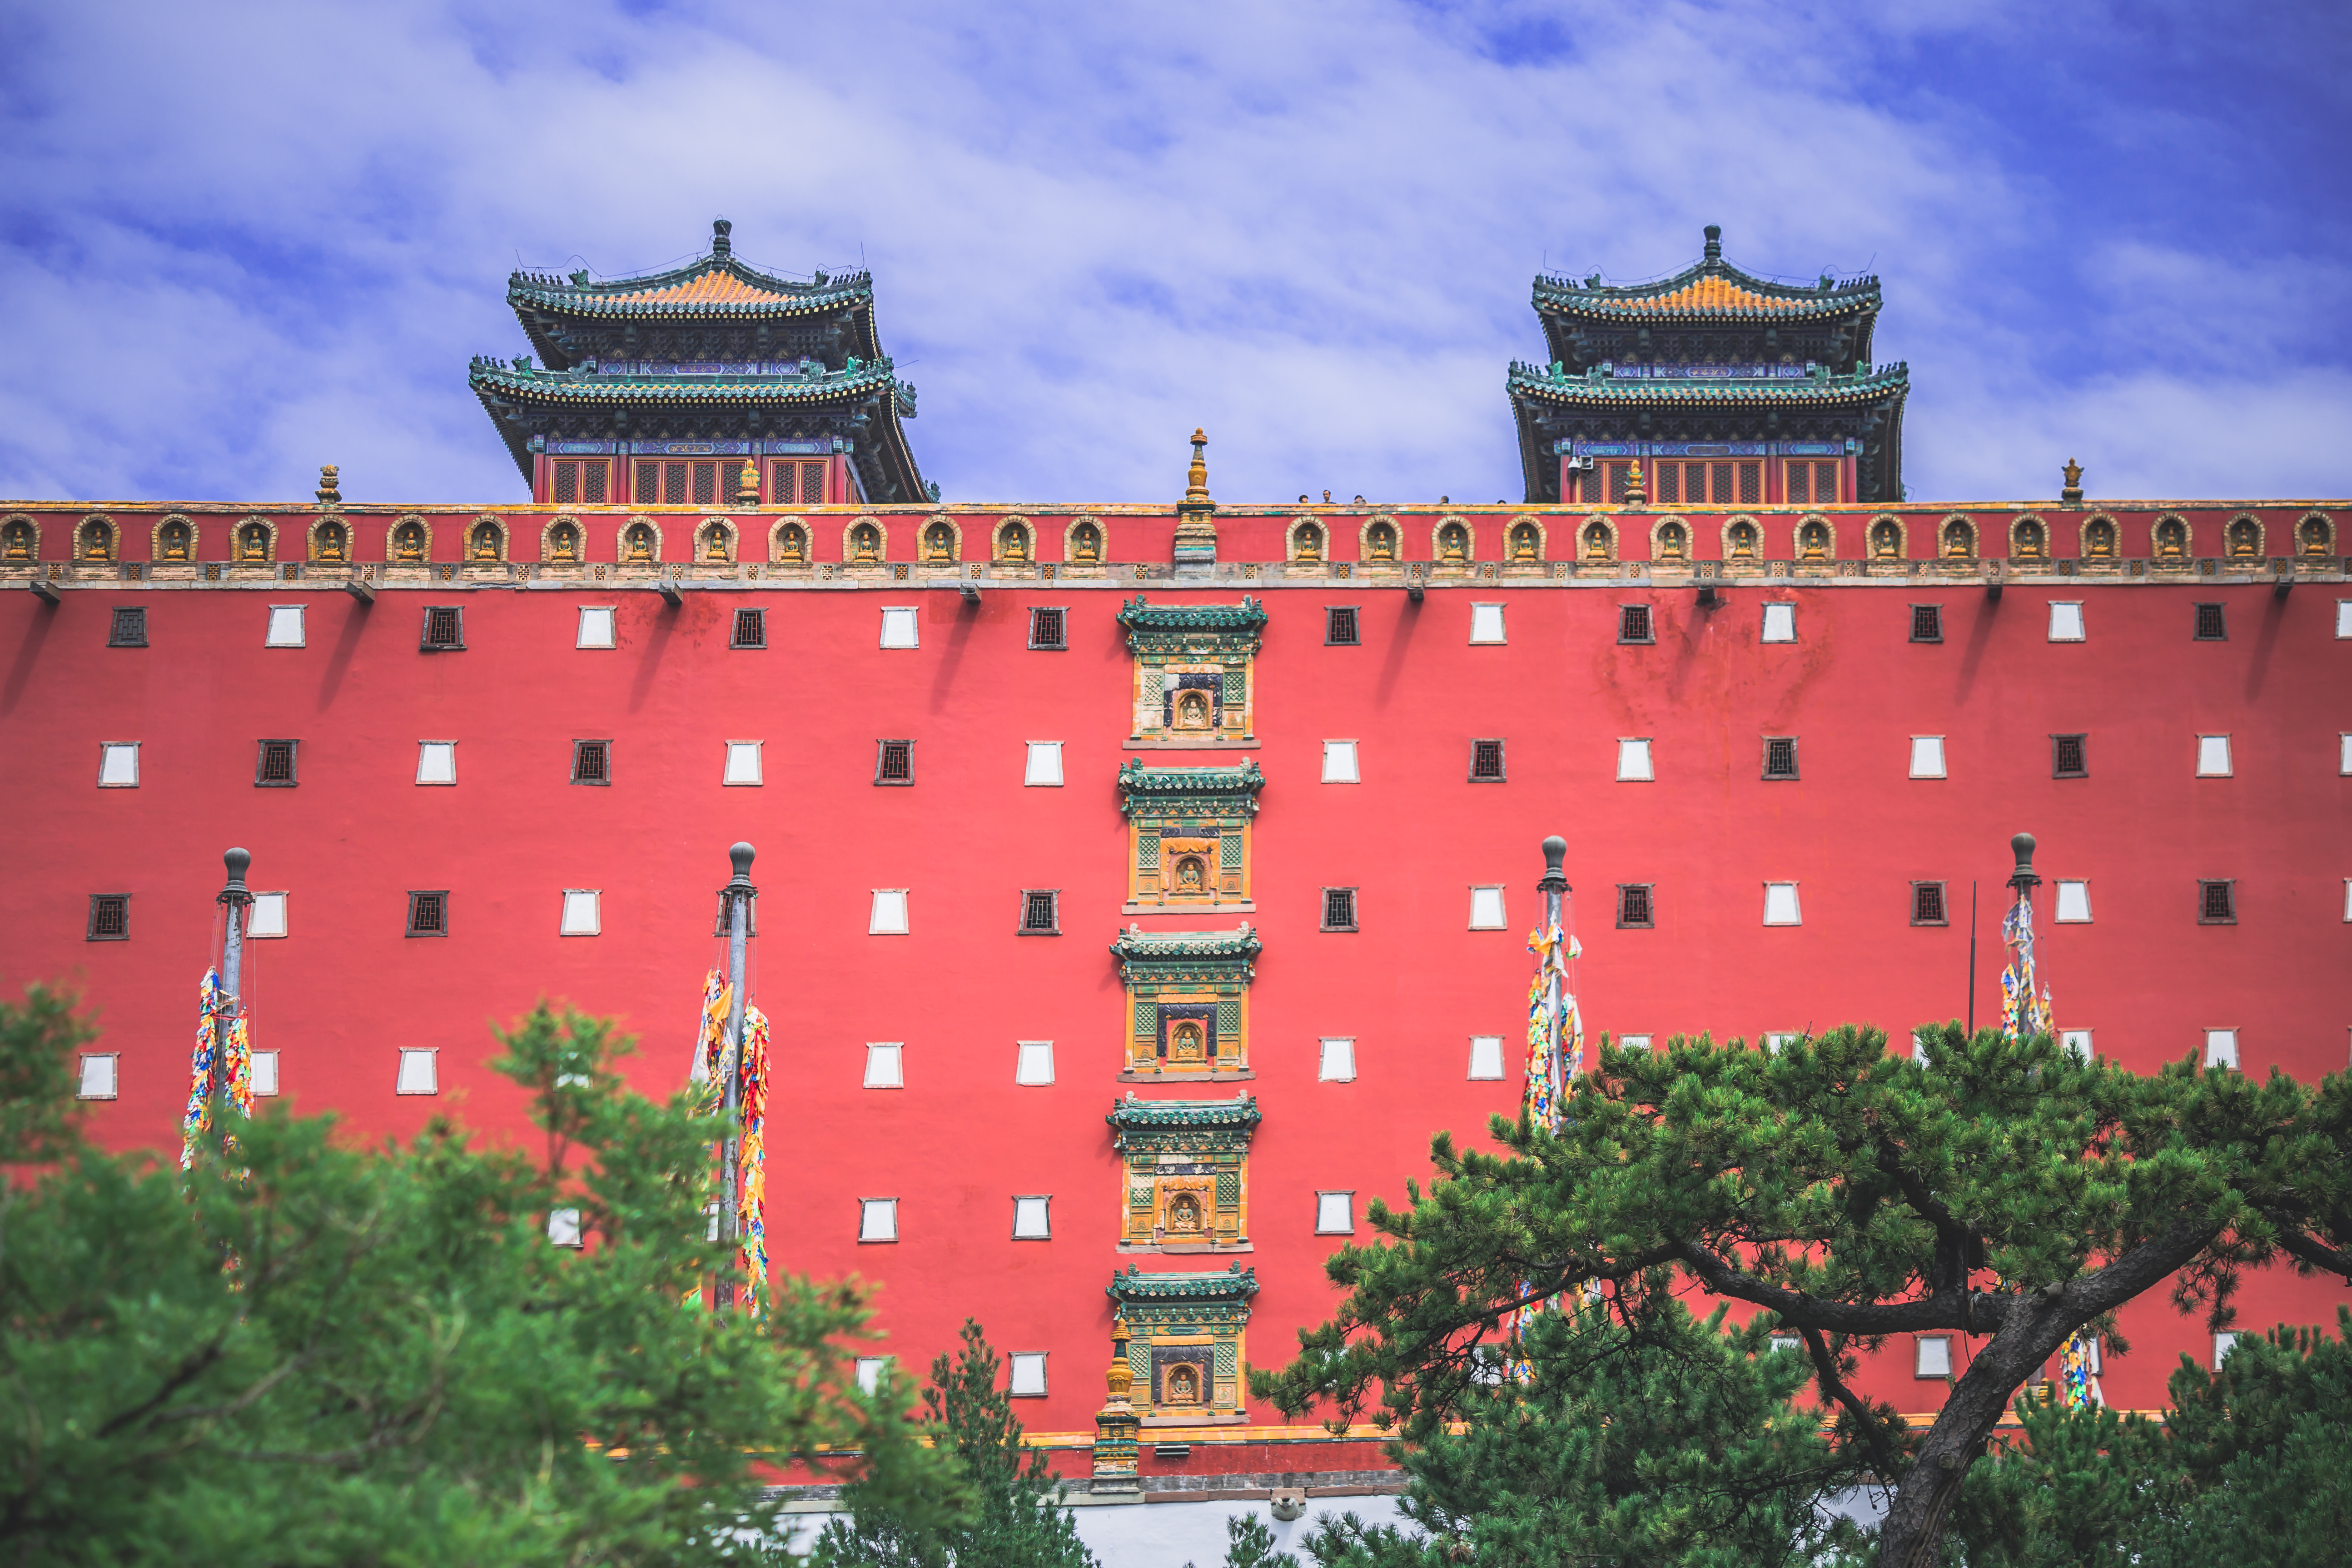 Top 8 Classical Architecture in Chengde - 2023